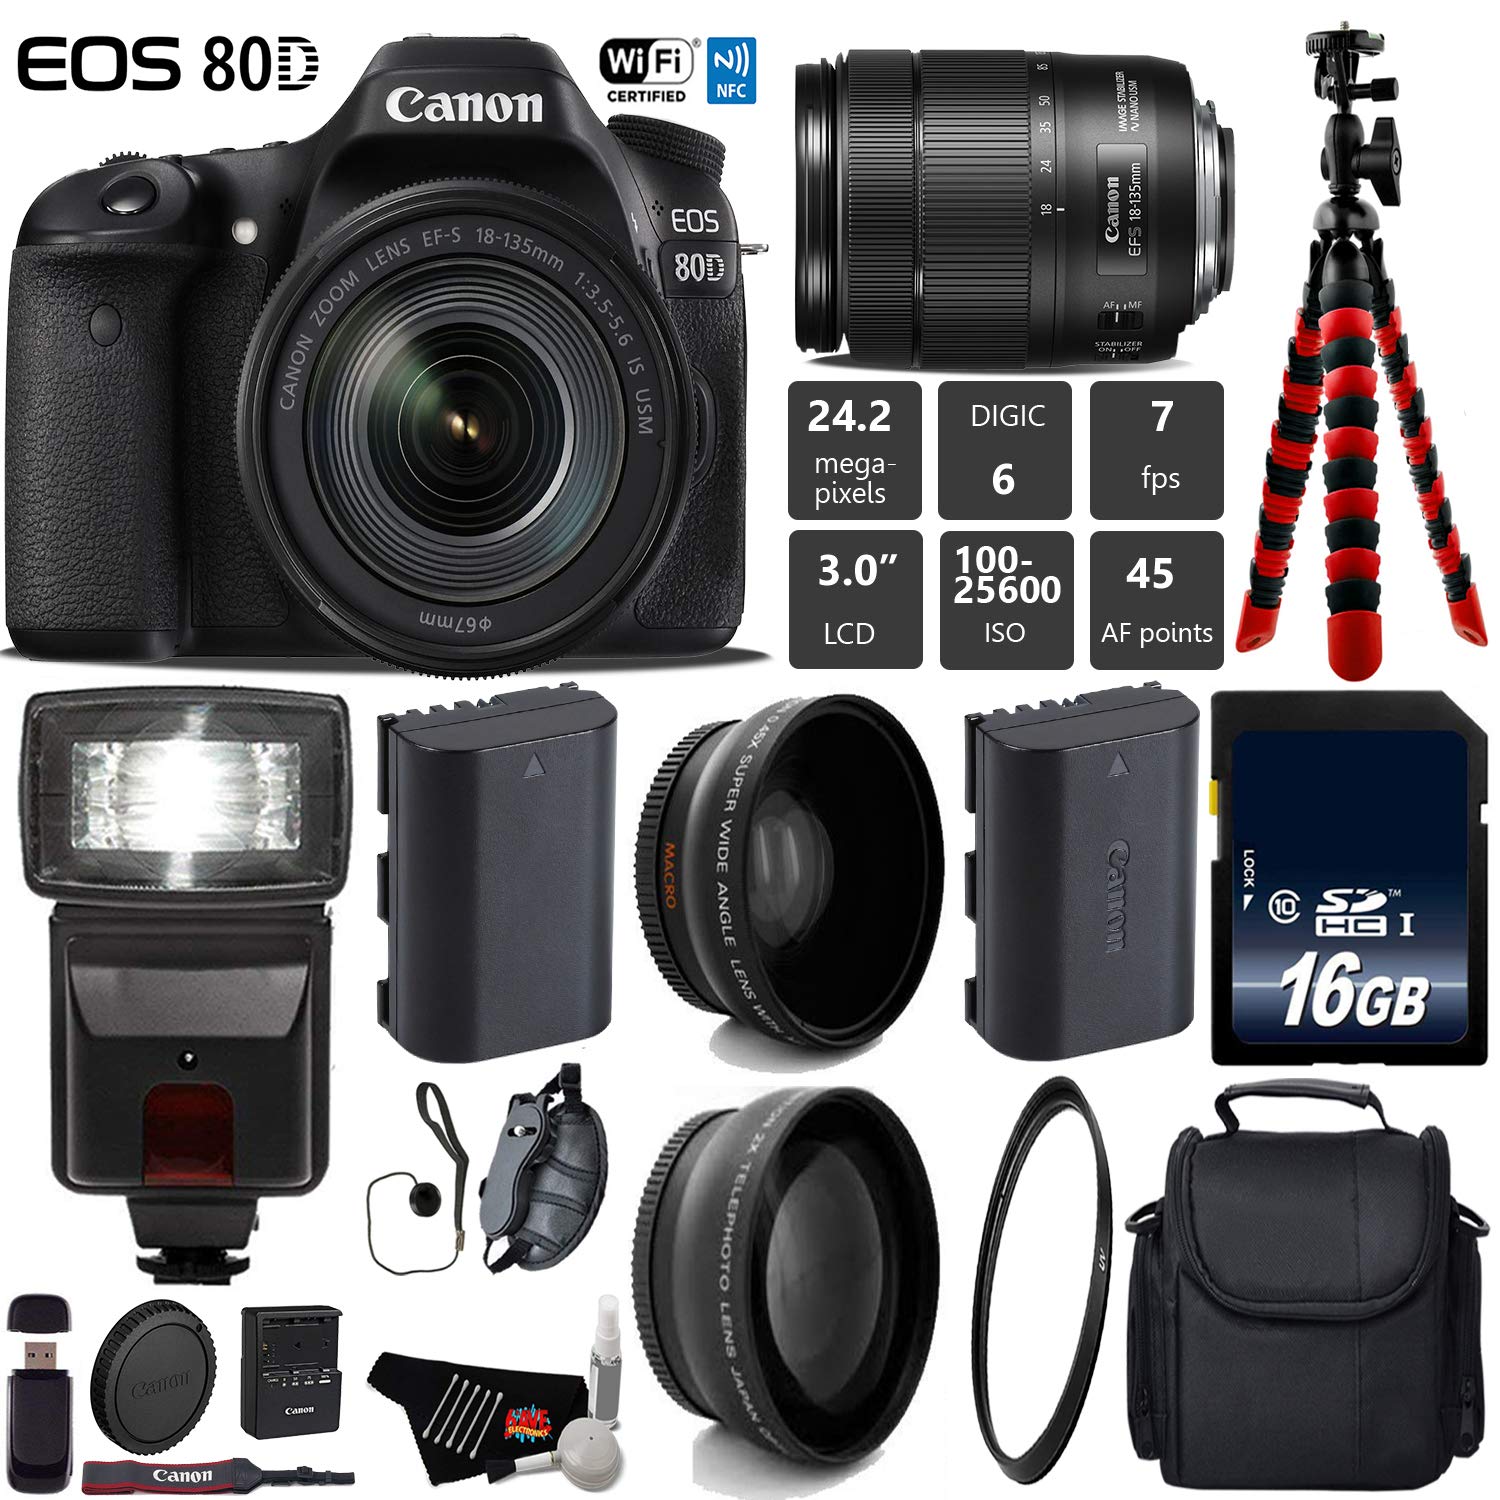 Canon EOS 80D DSLR Camera with 18-135mm is STM Lens + Flash + UV FLD CPL Filter Kit + Wide Angle & Telephoto Lens Base Bundle